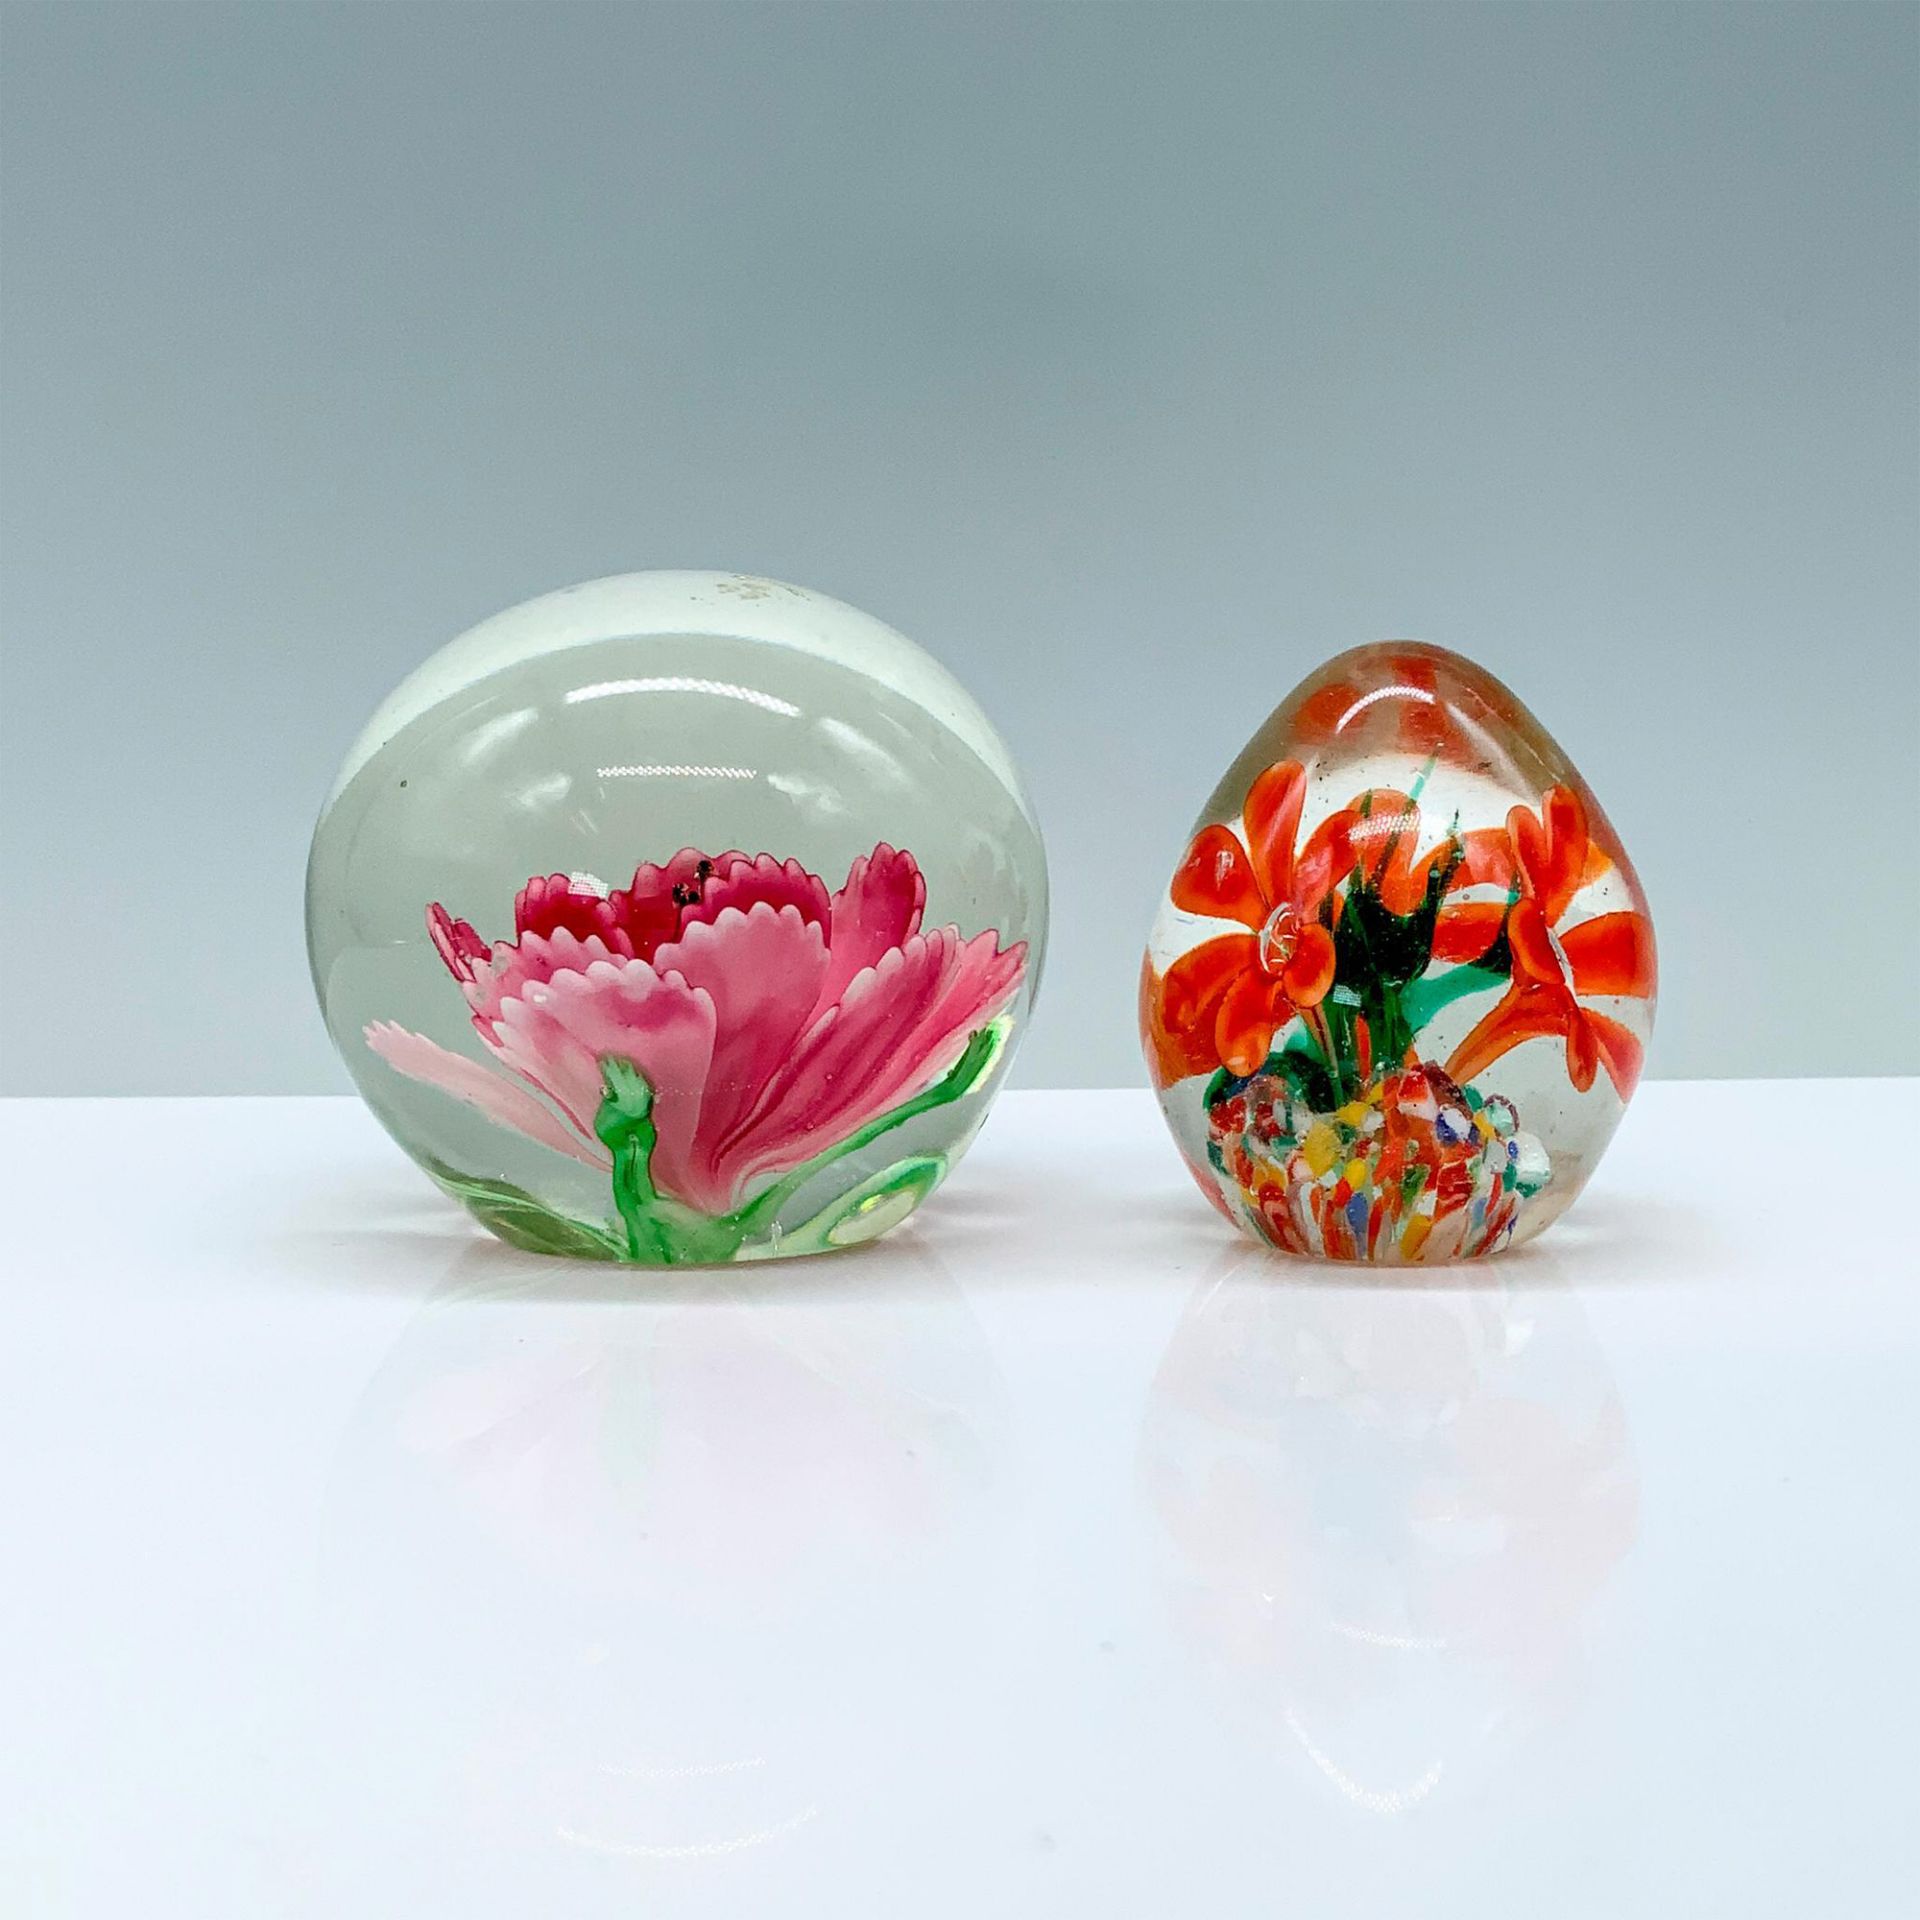 2pc Floral Motif Art Glass Paperweights - Image 2 of 3